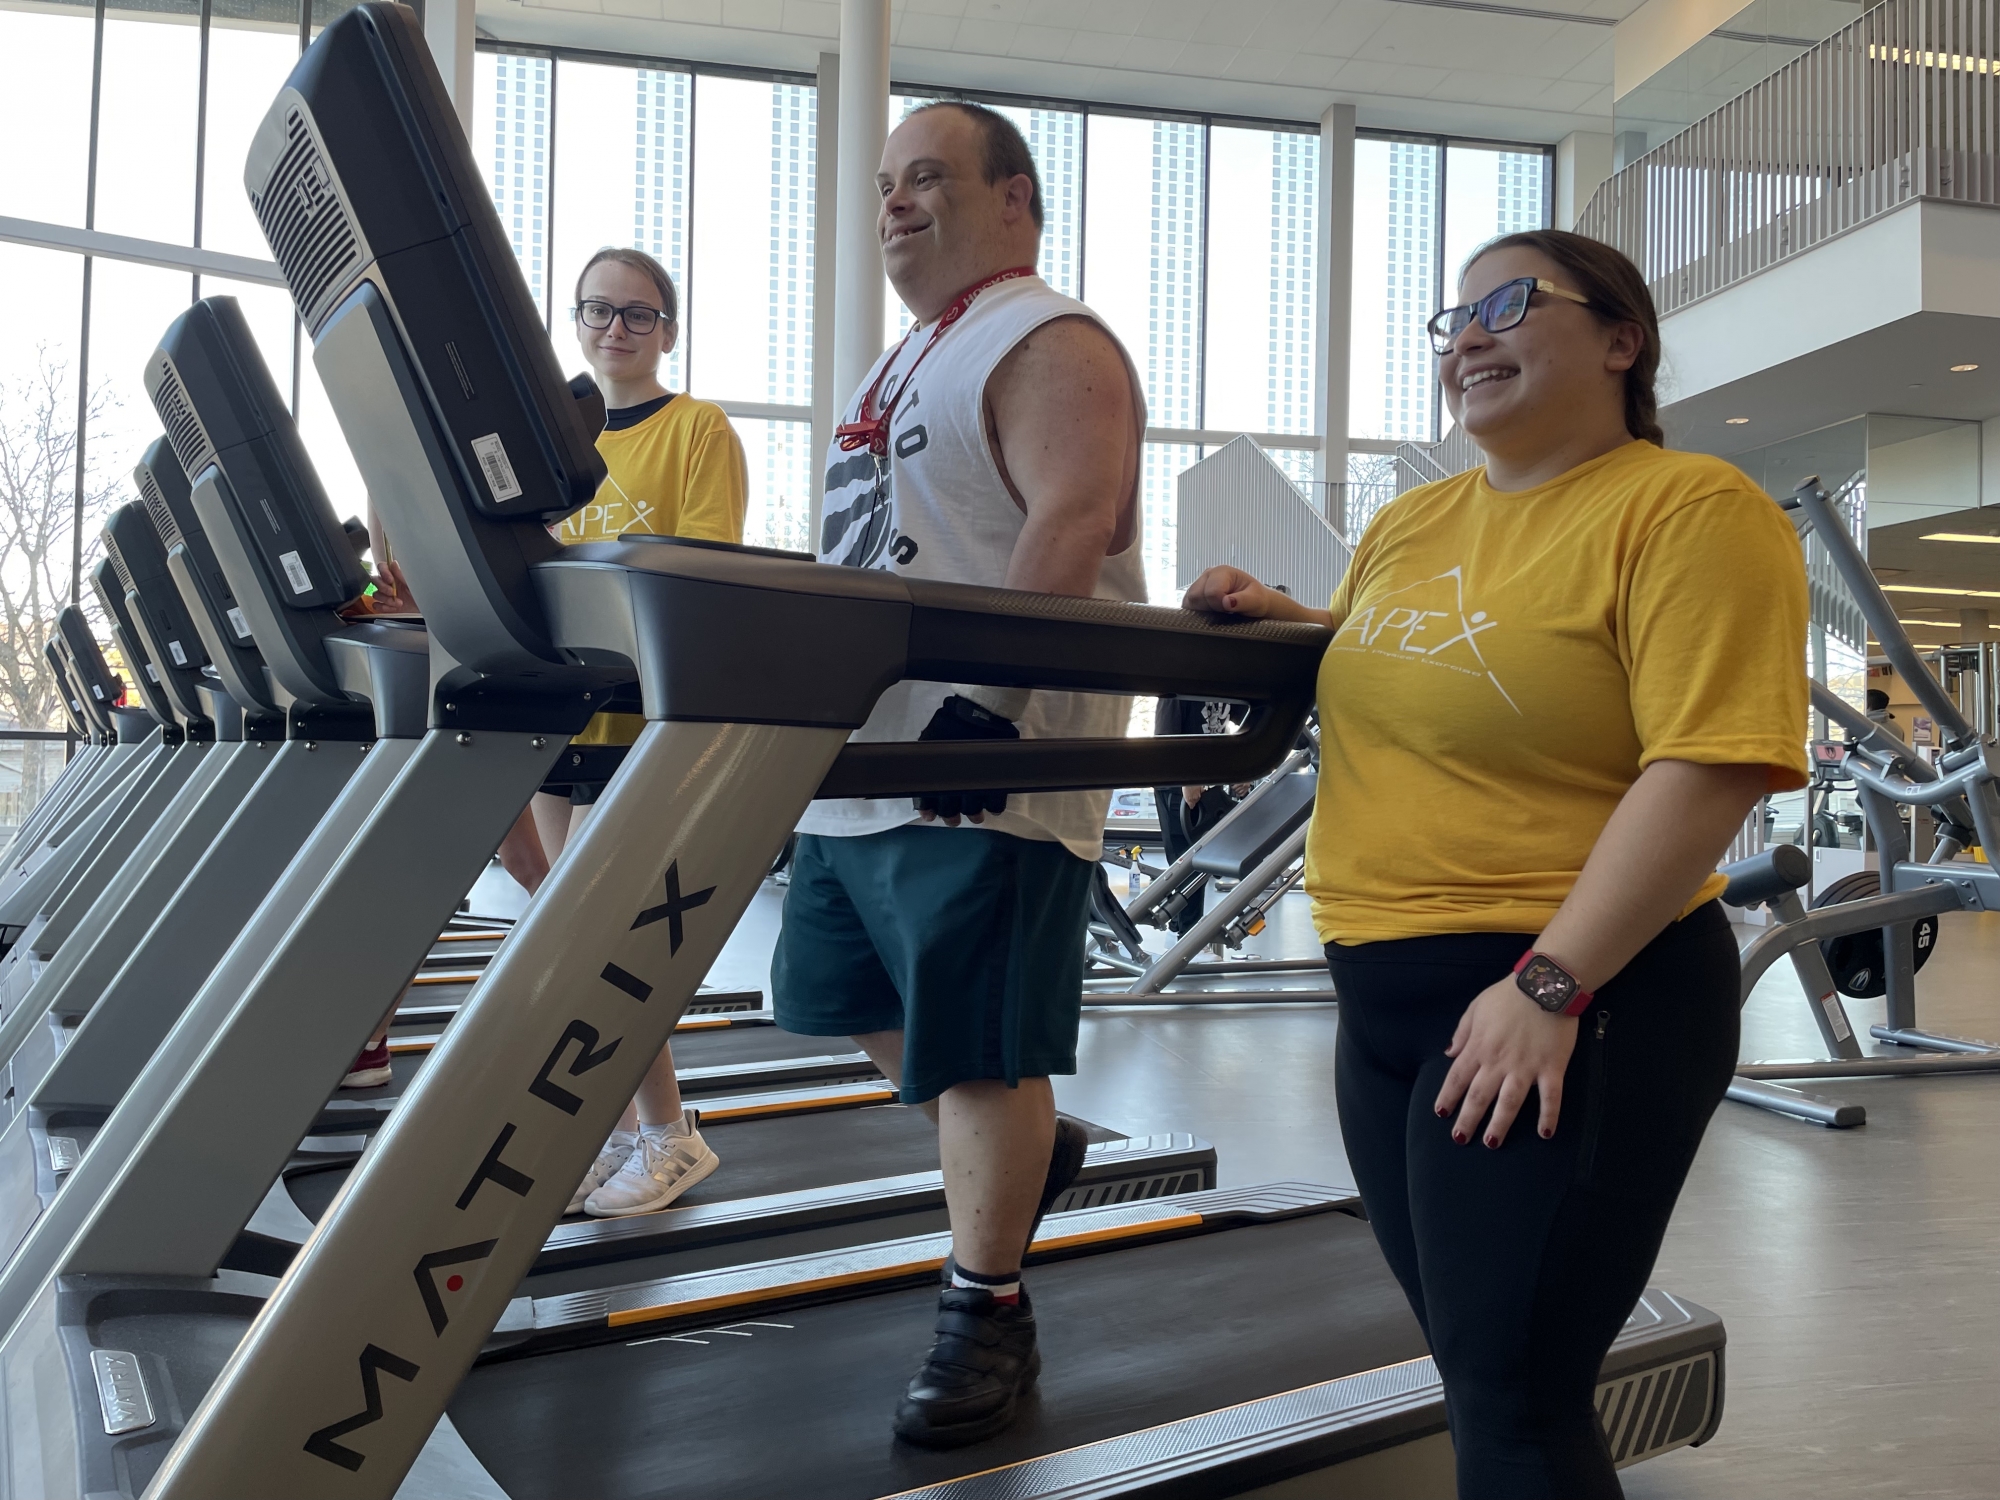 A man walks on a treadmill while two female trainers in yellow T-shirts look on.